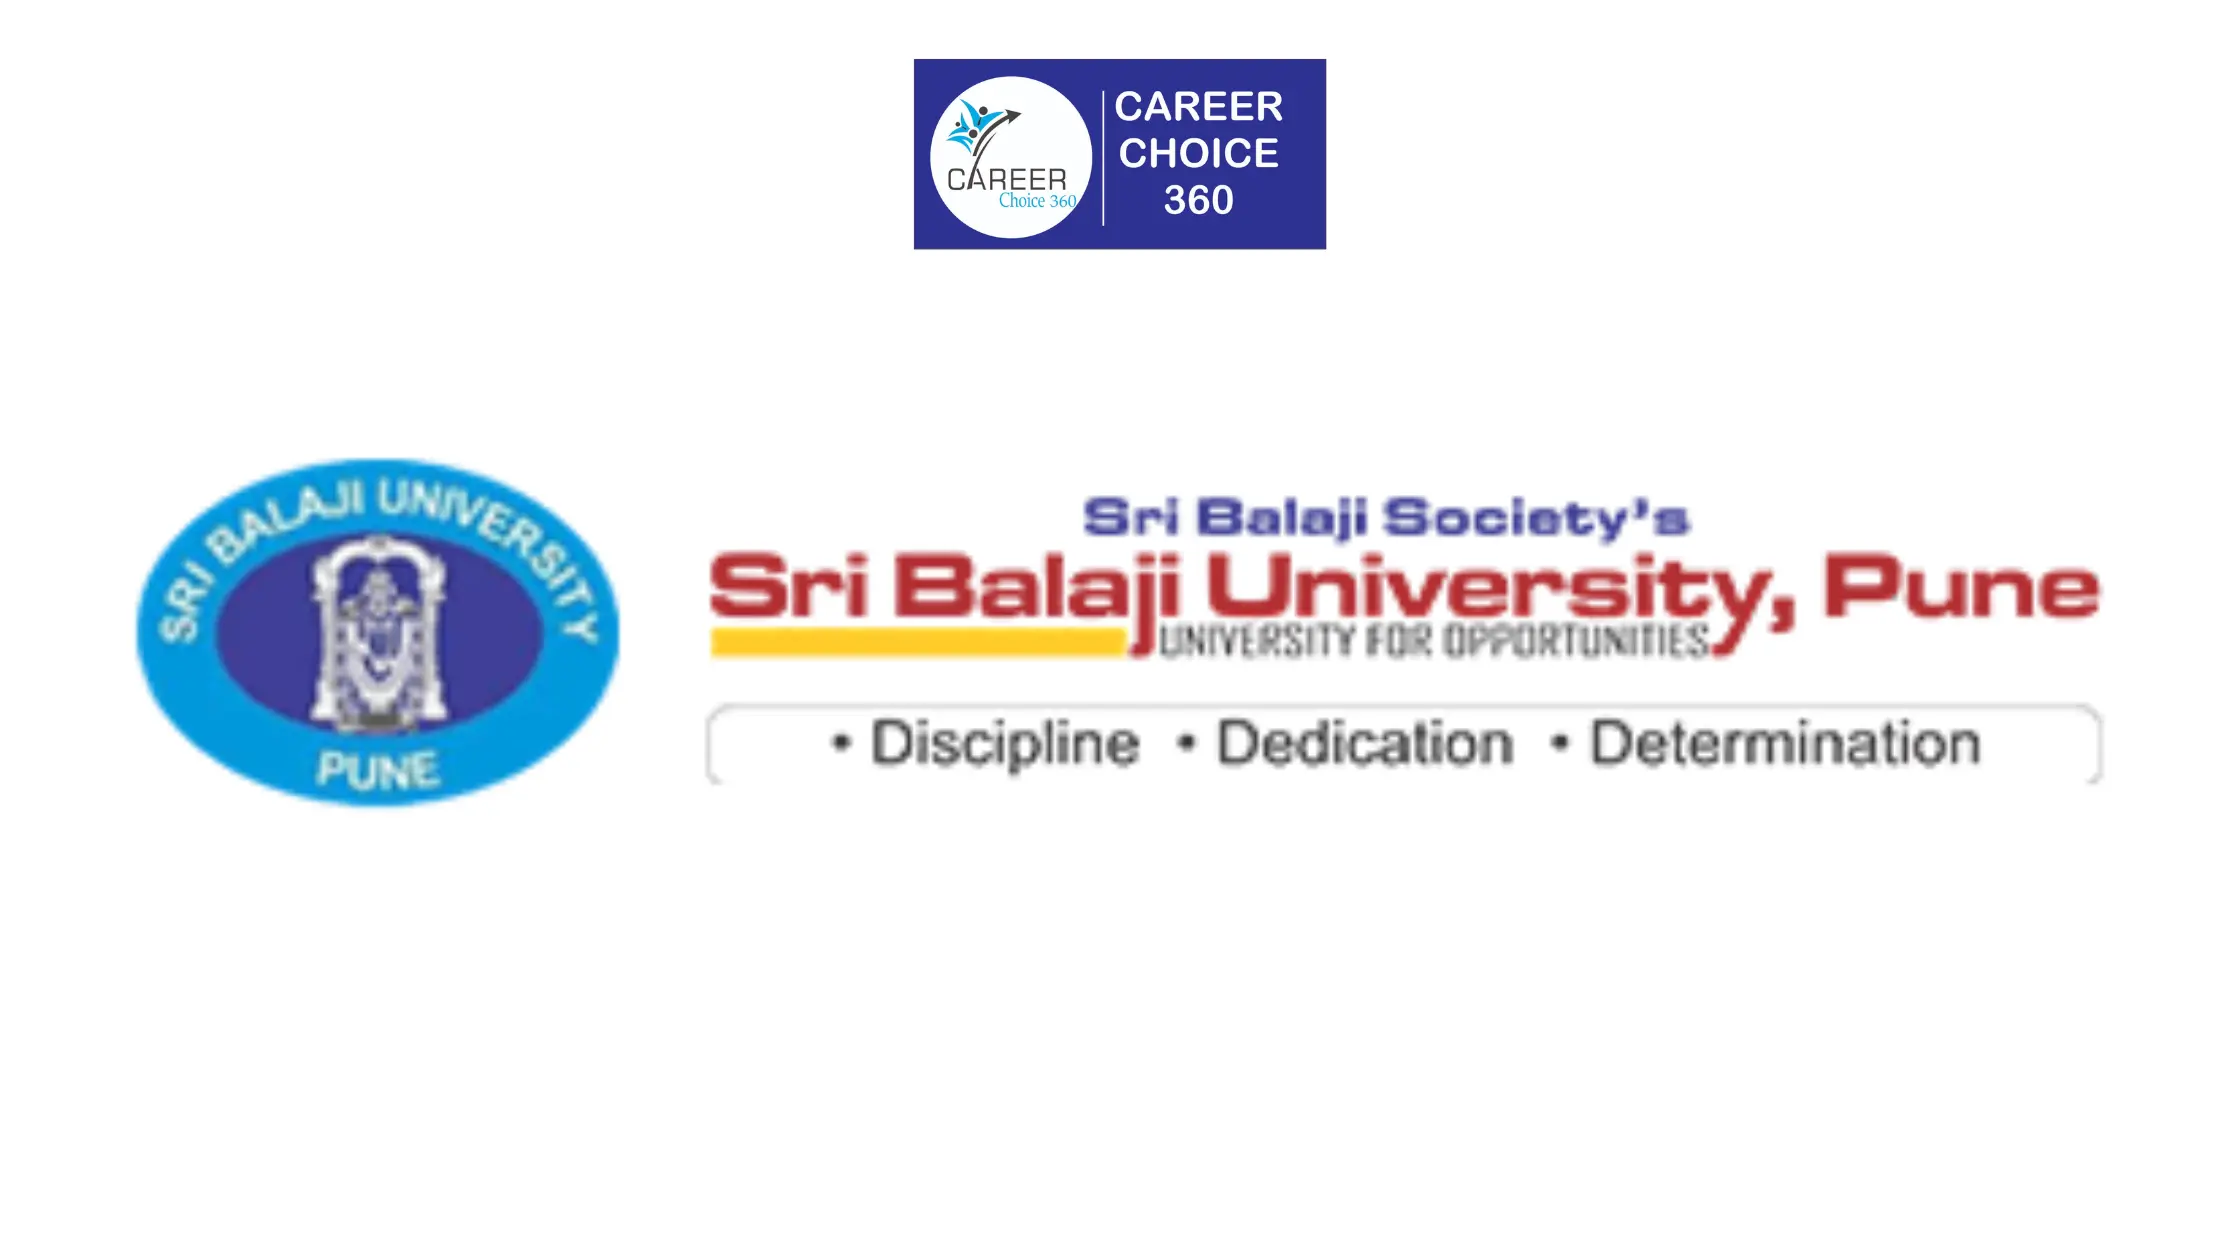 You are currently viewing Sri Balaji University, Pune: Highlights, Courses and Fees, Admissions, Selection Criteria, Eligibility Criteria, Placement, Ranking